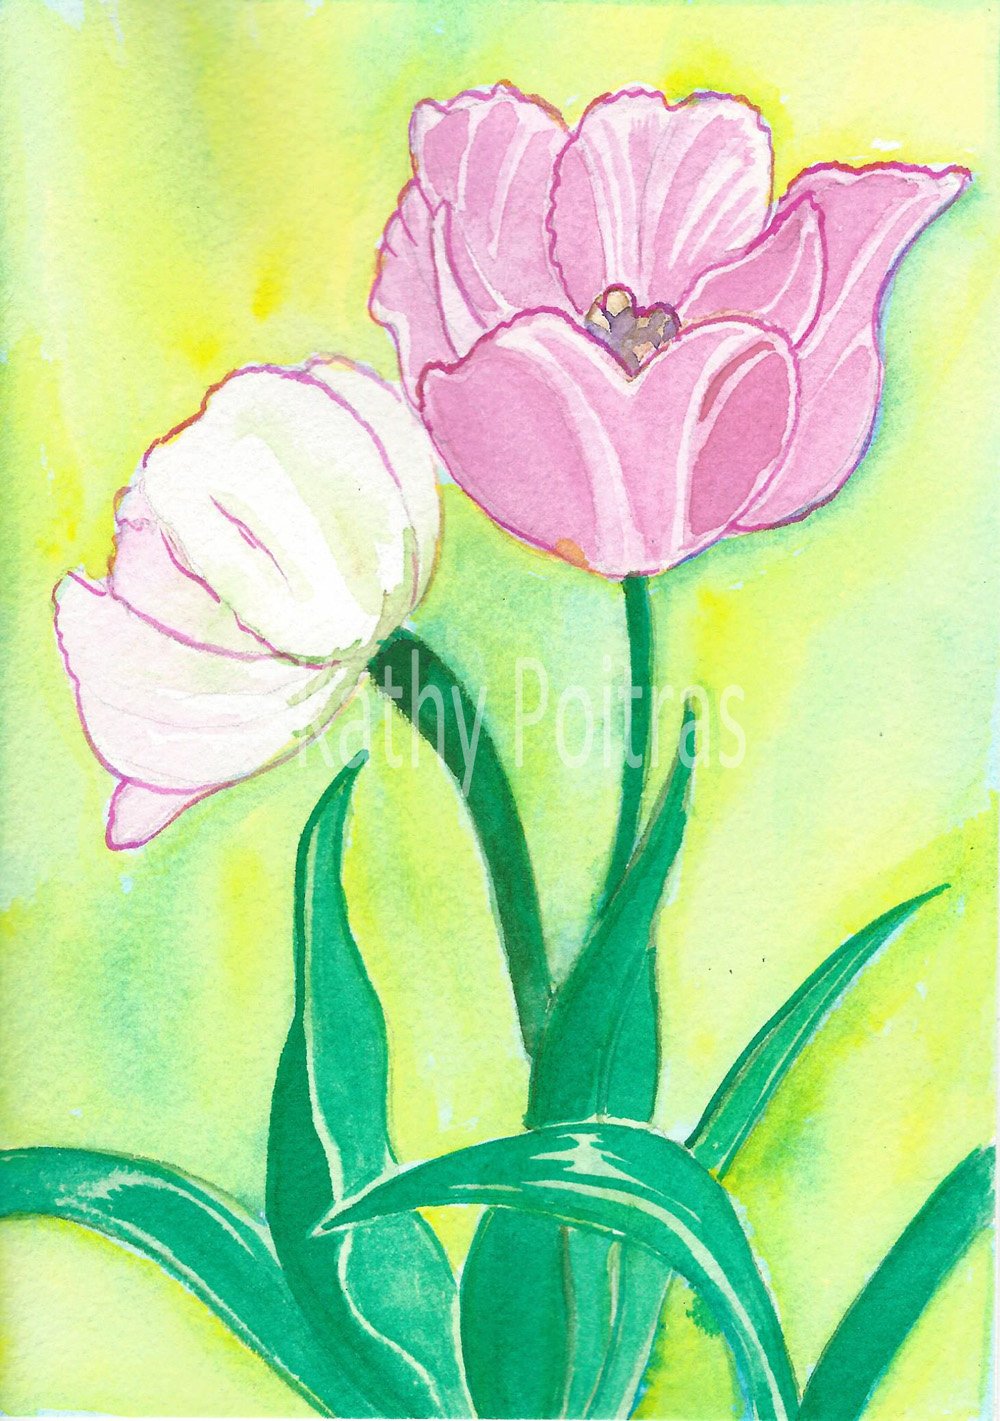 two pink watercolor and ink tulips, one facing forward, one facing backward. More realistic than Kathy Poitras' usual flower paintings